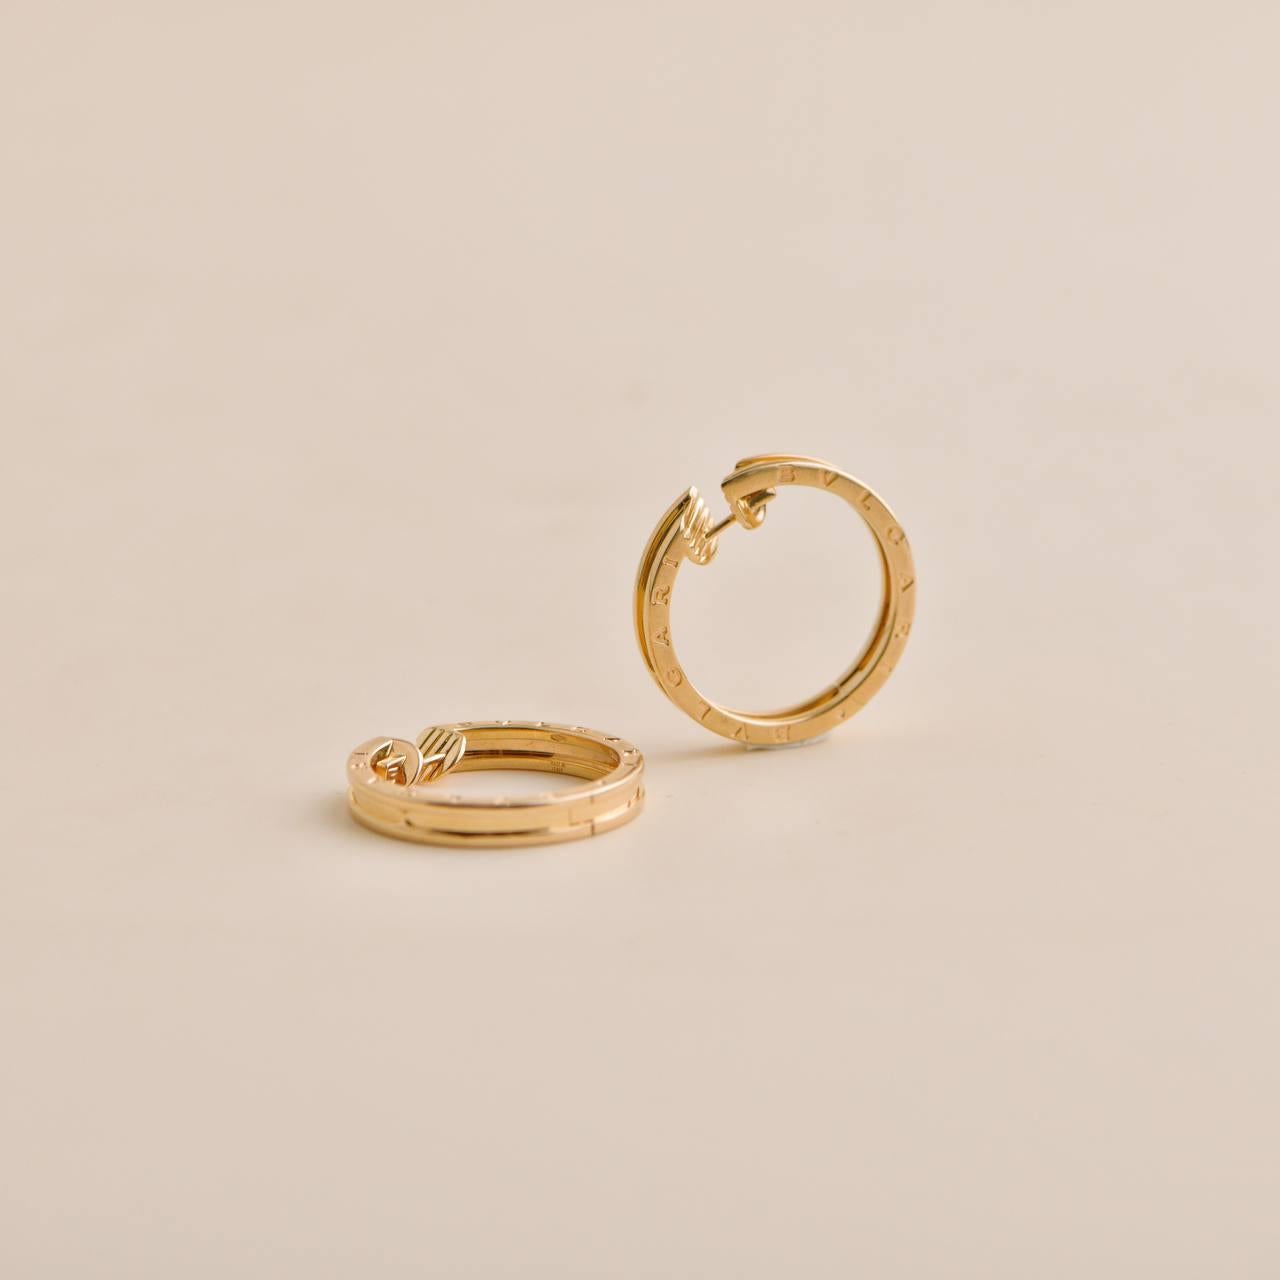 Bvlgari B.Zero1 18K Rose Large Rose Gold Hoop Earring In Excellent Condition For Sale In Banbury, GB